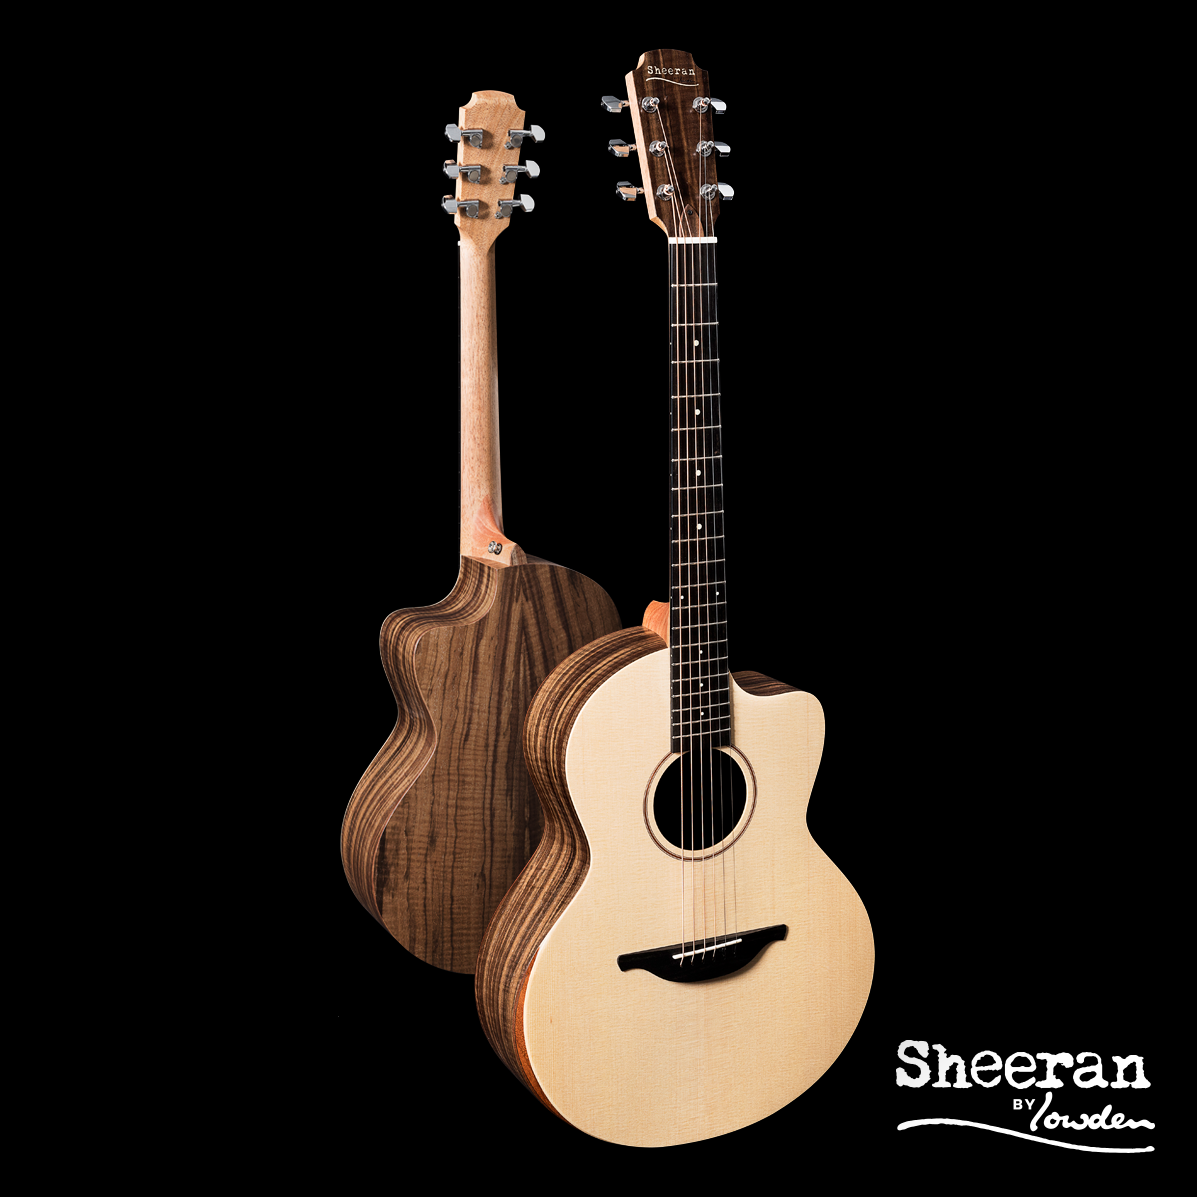 Sheeran by Lowden S04 Solid Sitka Spruce Top, Figured Walnut back and sides, Body Bevel, LR Bags Element pickup